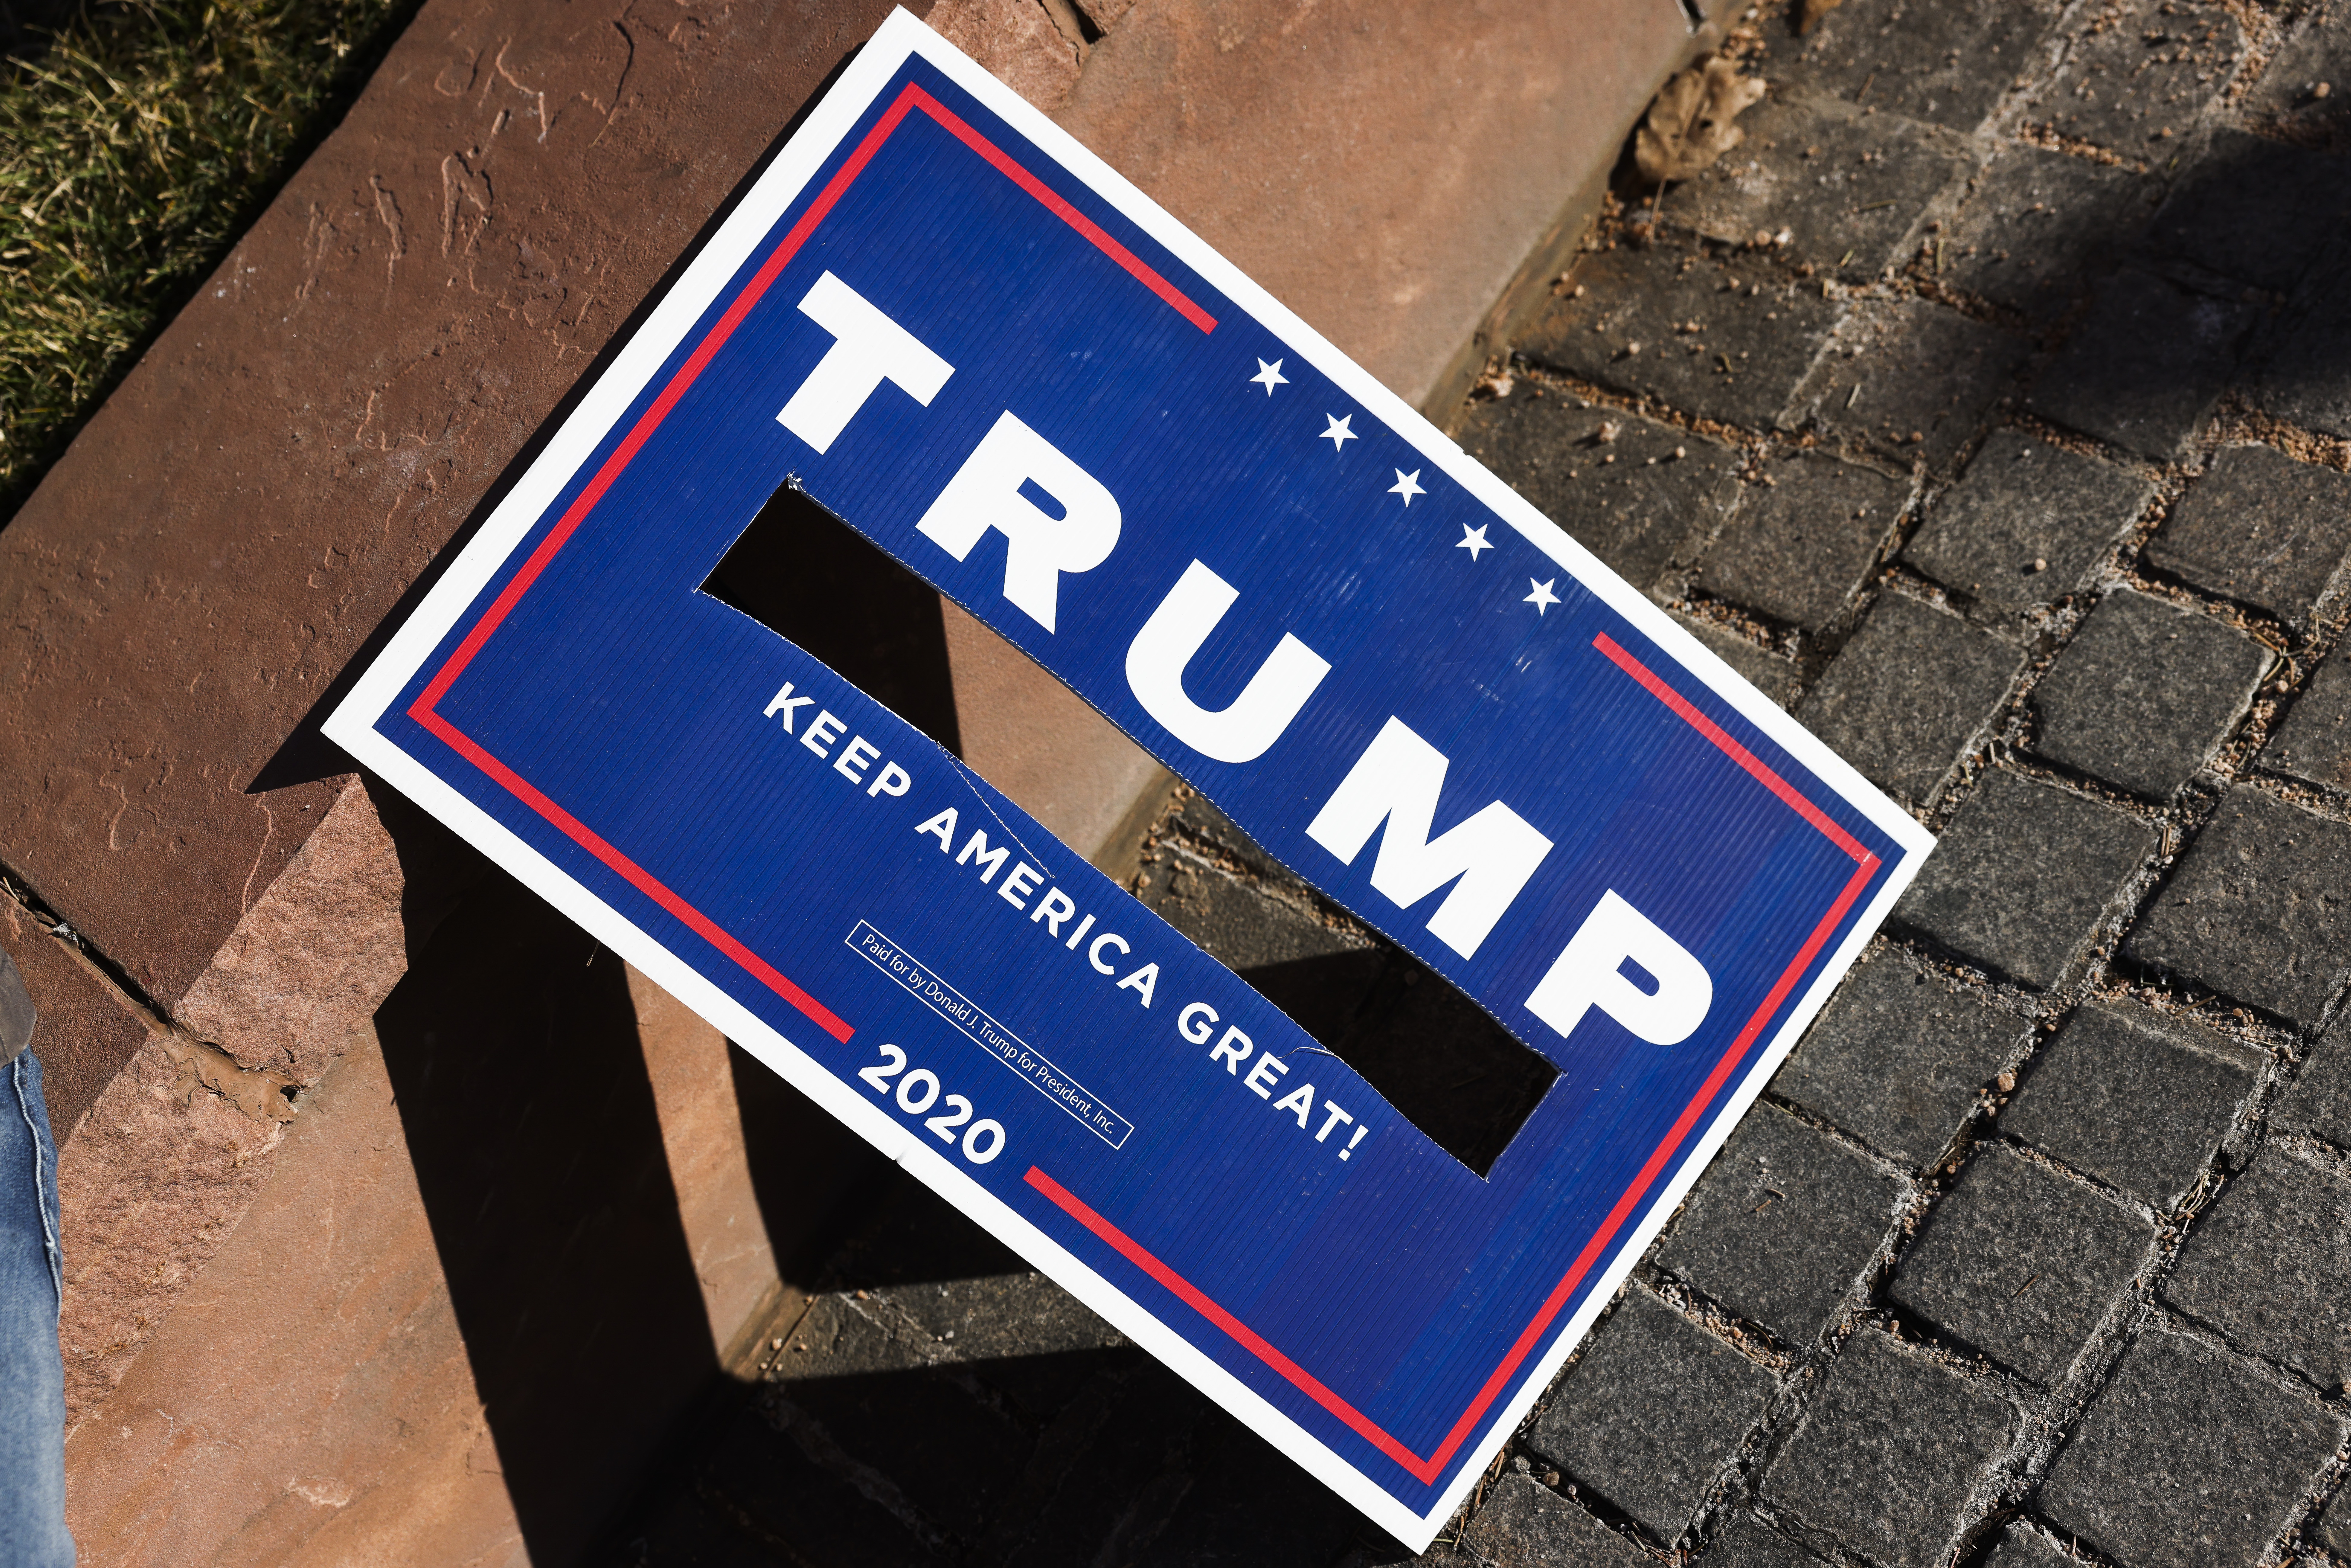 A Trump campaign sign with a hole in it where Pence’s name was, on a walkway leaning against a curb.